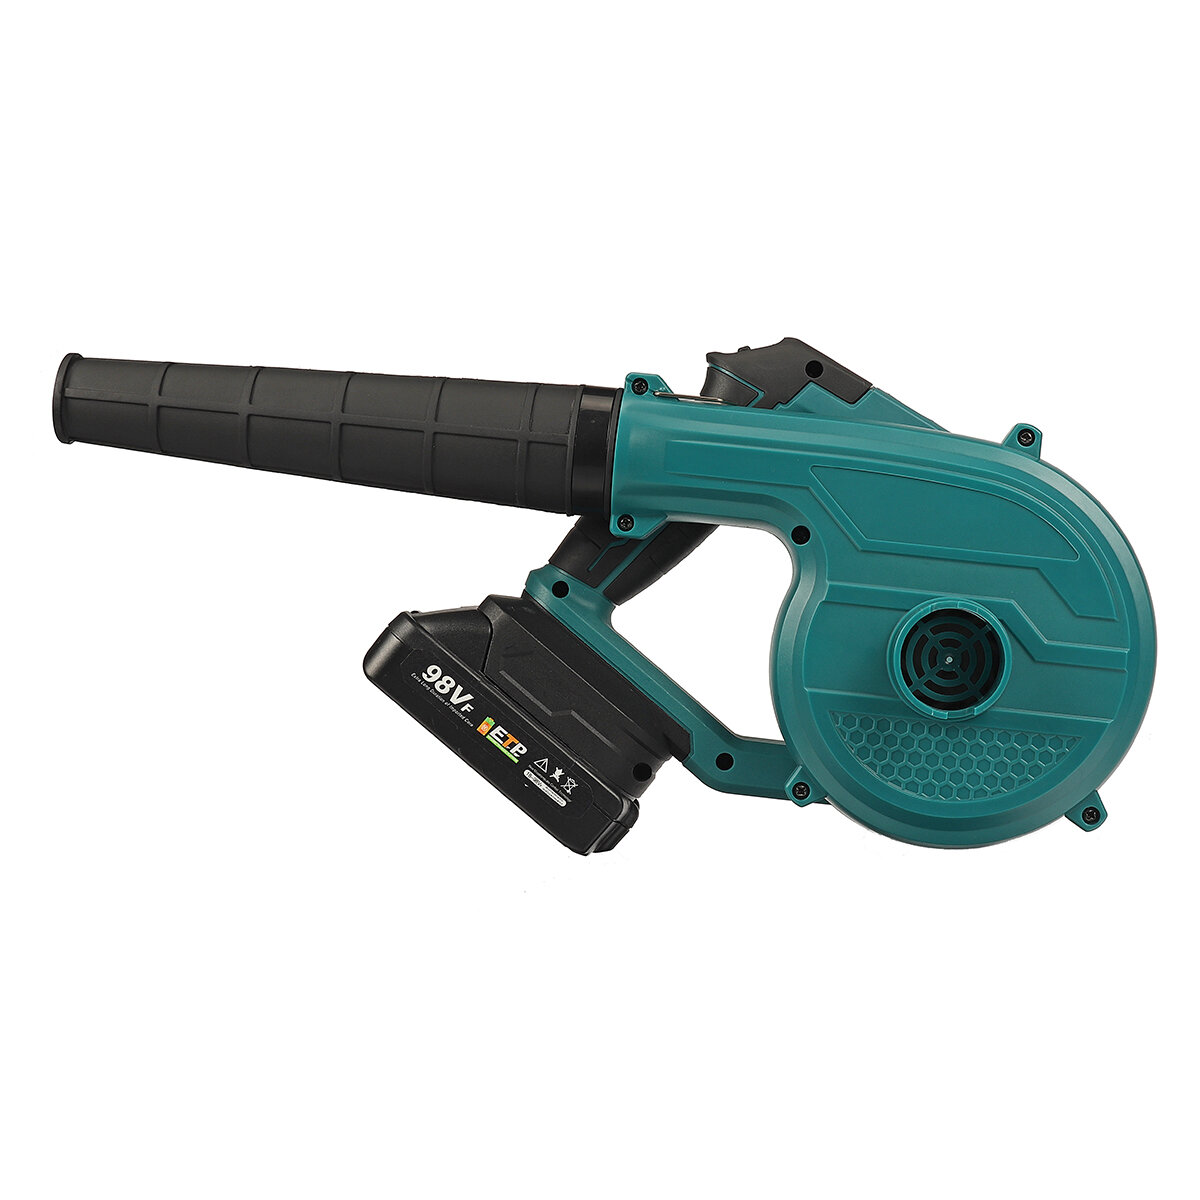 Image of VIOLEWORKS 21V 2 IN 1 Cordless 180° Rotation Electric Air Blower & Suction Handheld Leaf Computer Dust Collector Cleaner